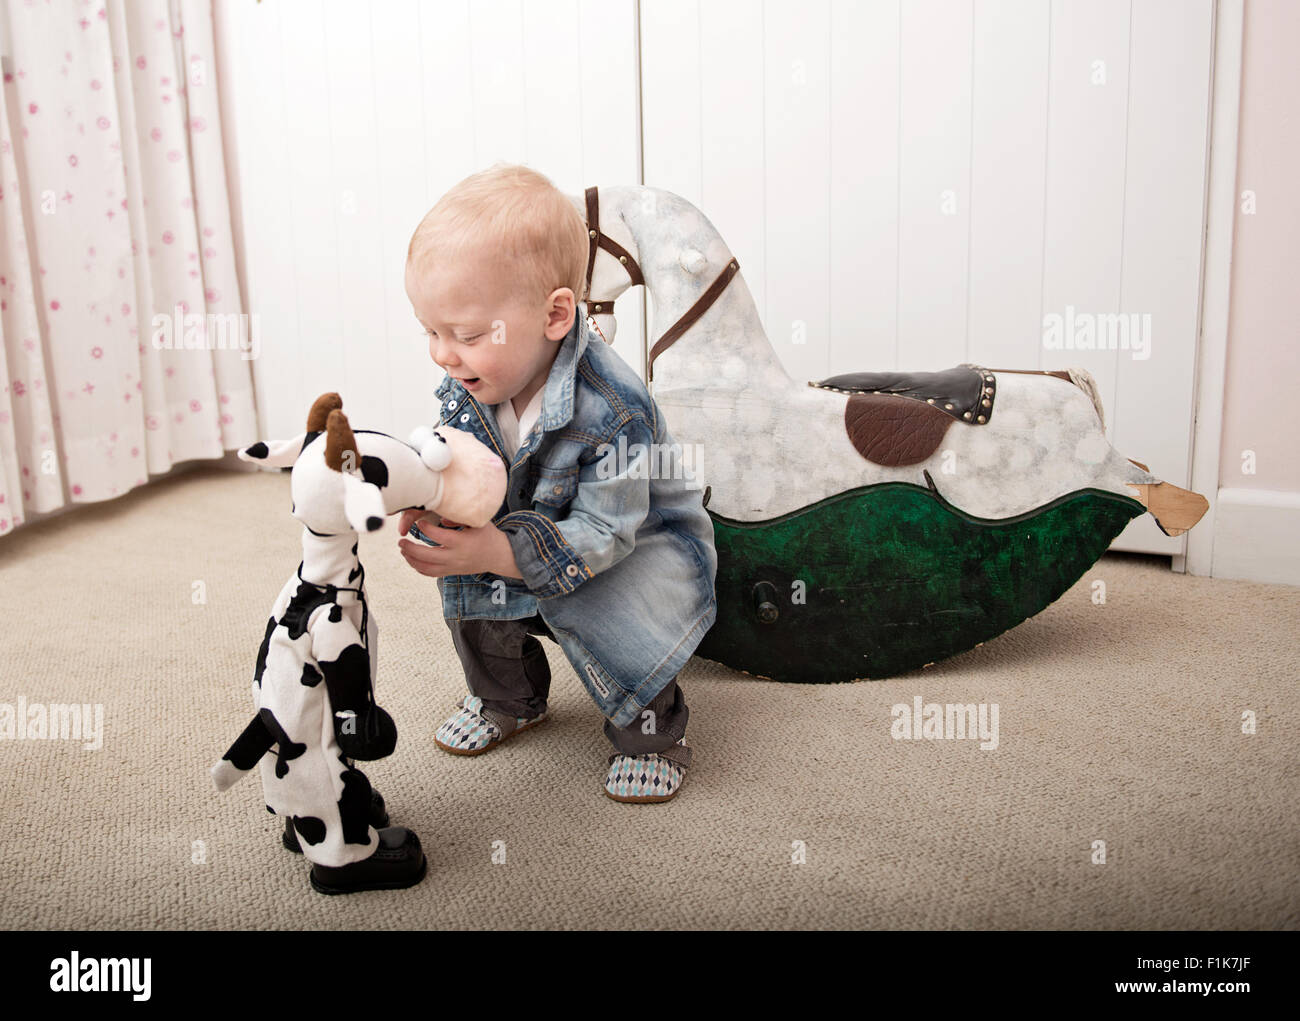 Smiling infant playing with teddies on playroom floor Stock Photo